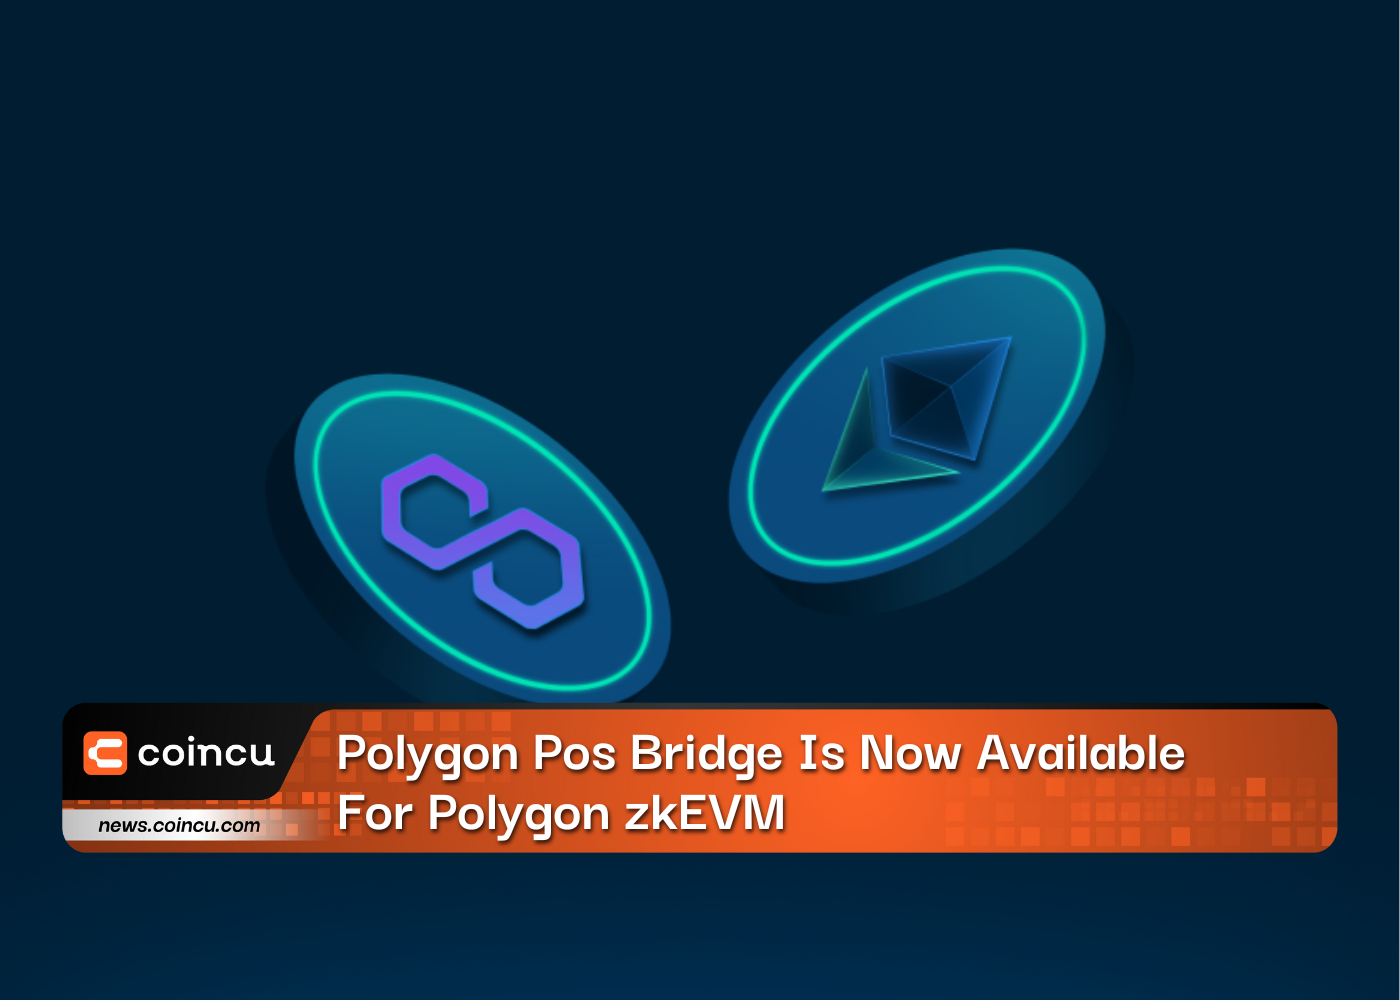 Polygon Pos Bridge Is Now Available For Polygon zkEVM